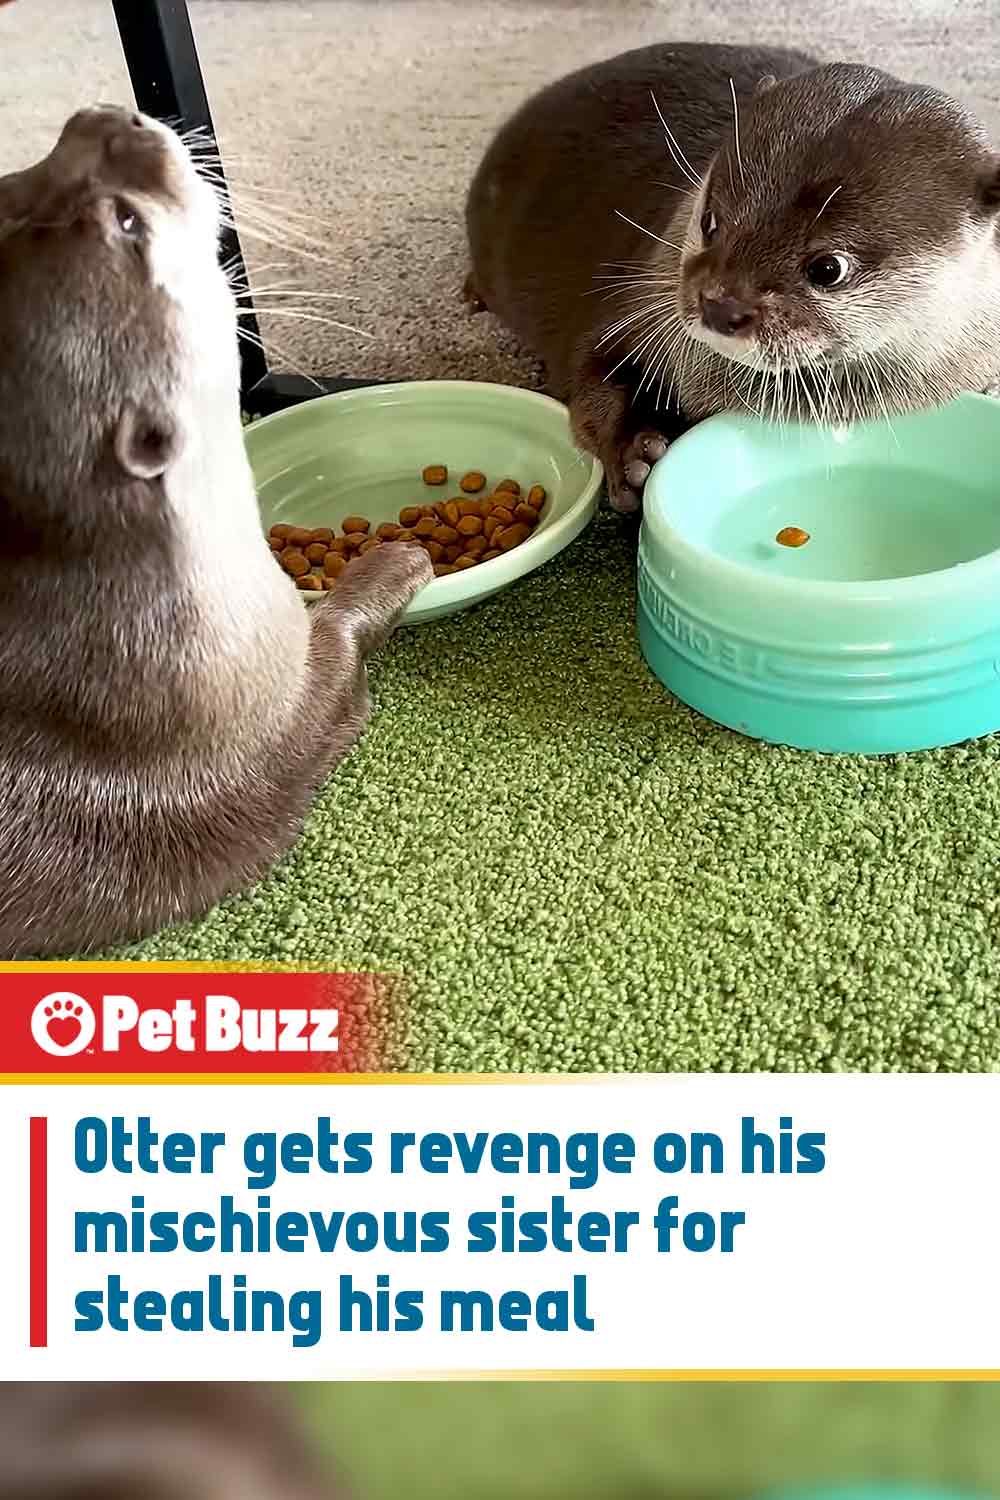 Otter gets revenge on his mischievous sister for stealing his meal